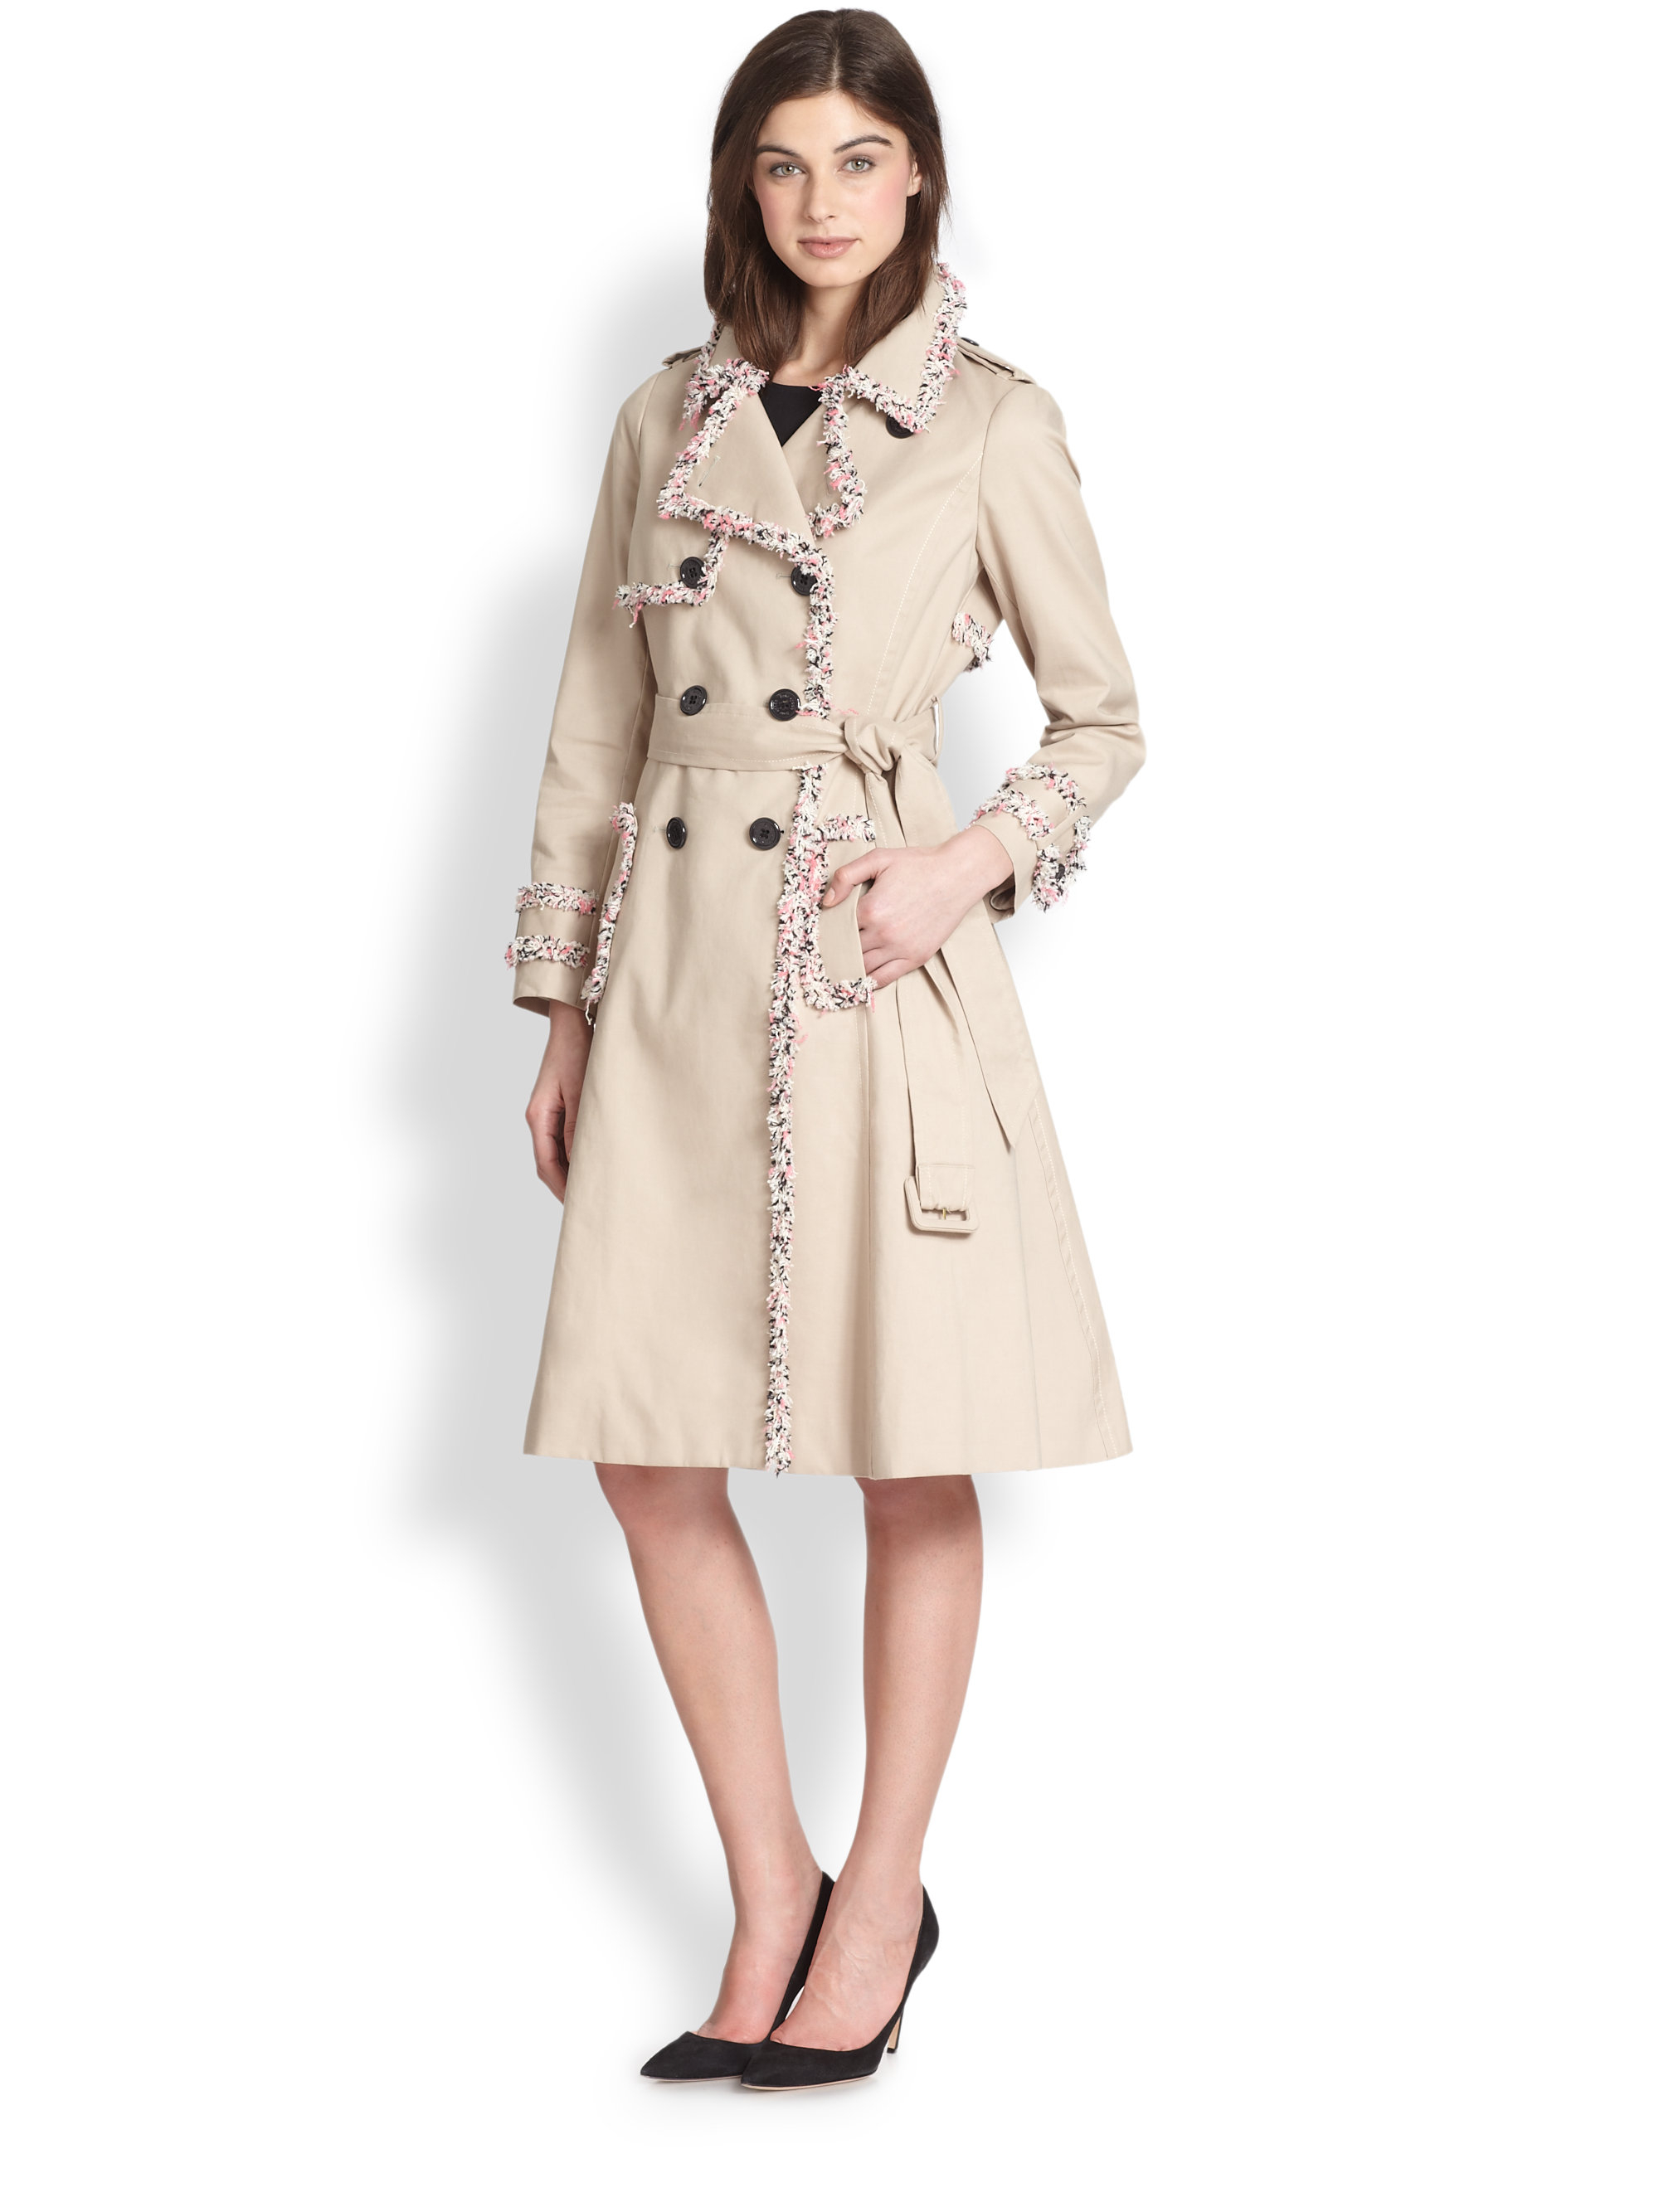 Lyst - Kate spade new york Fontaine Trenchcoat in Natural